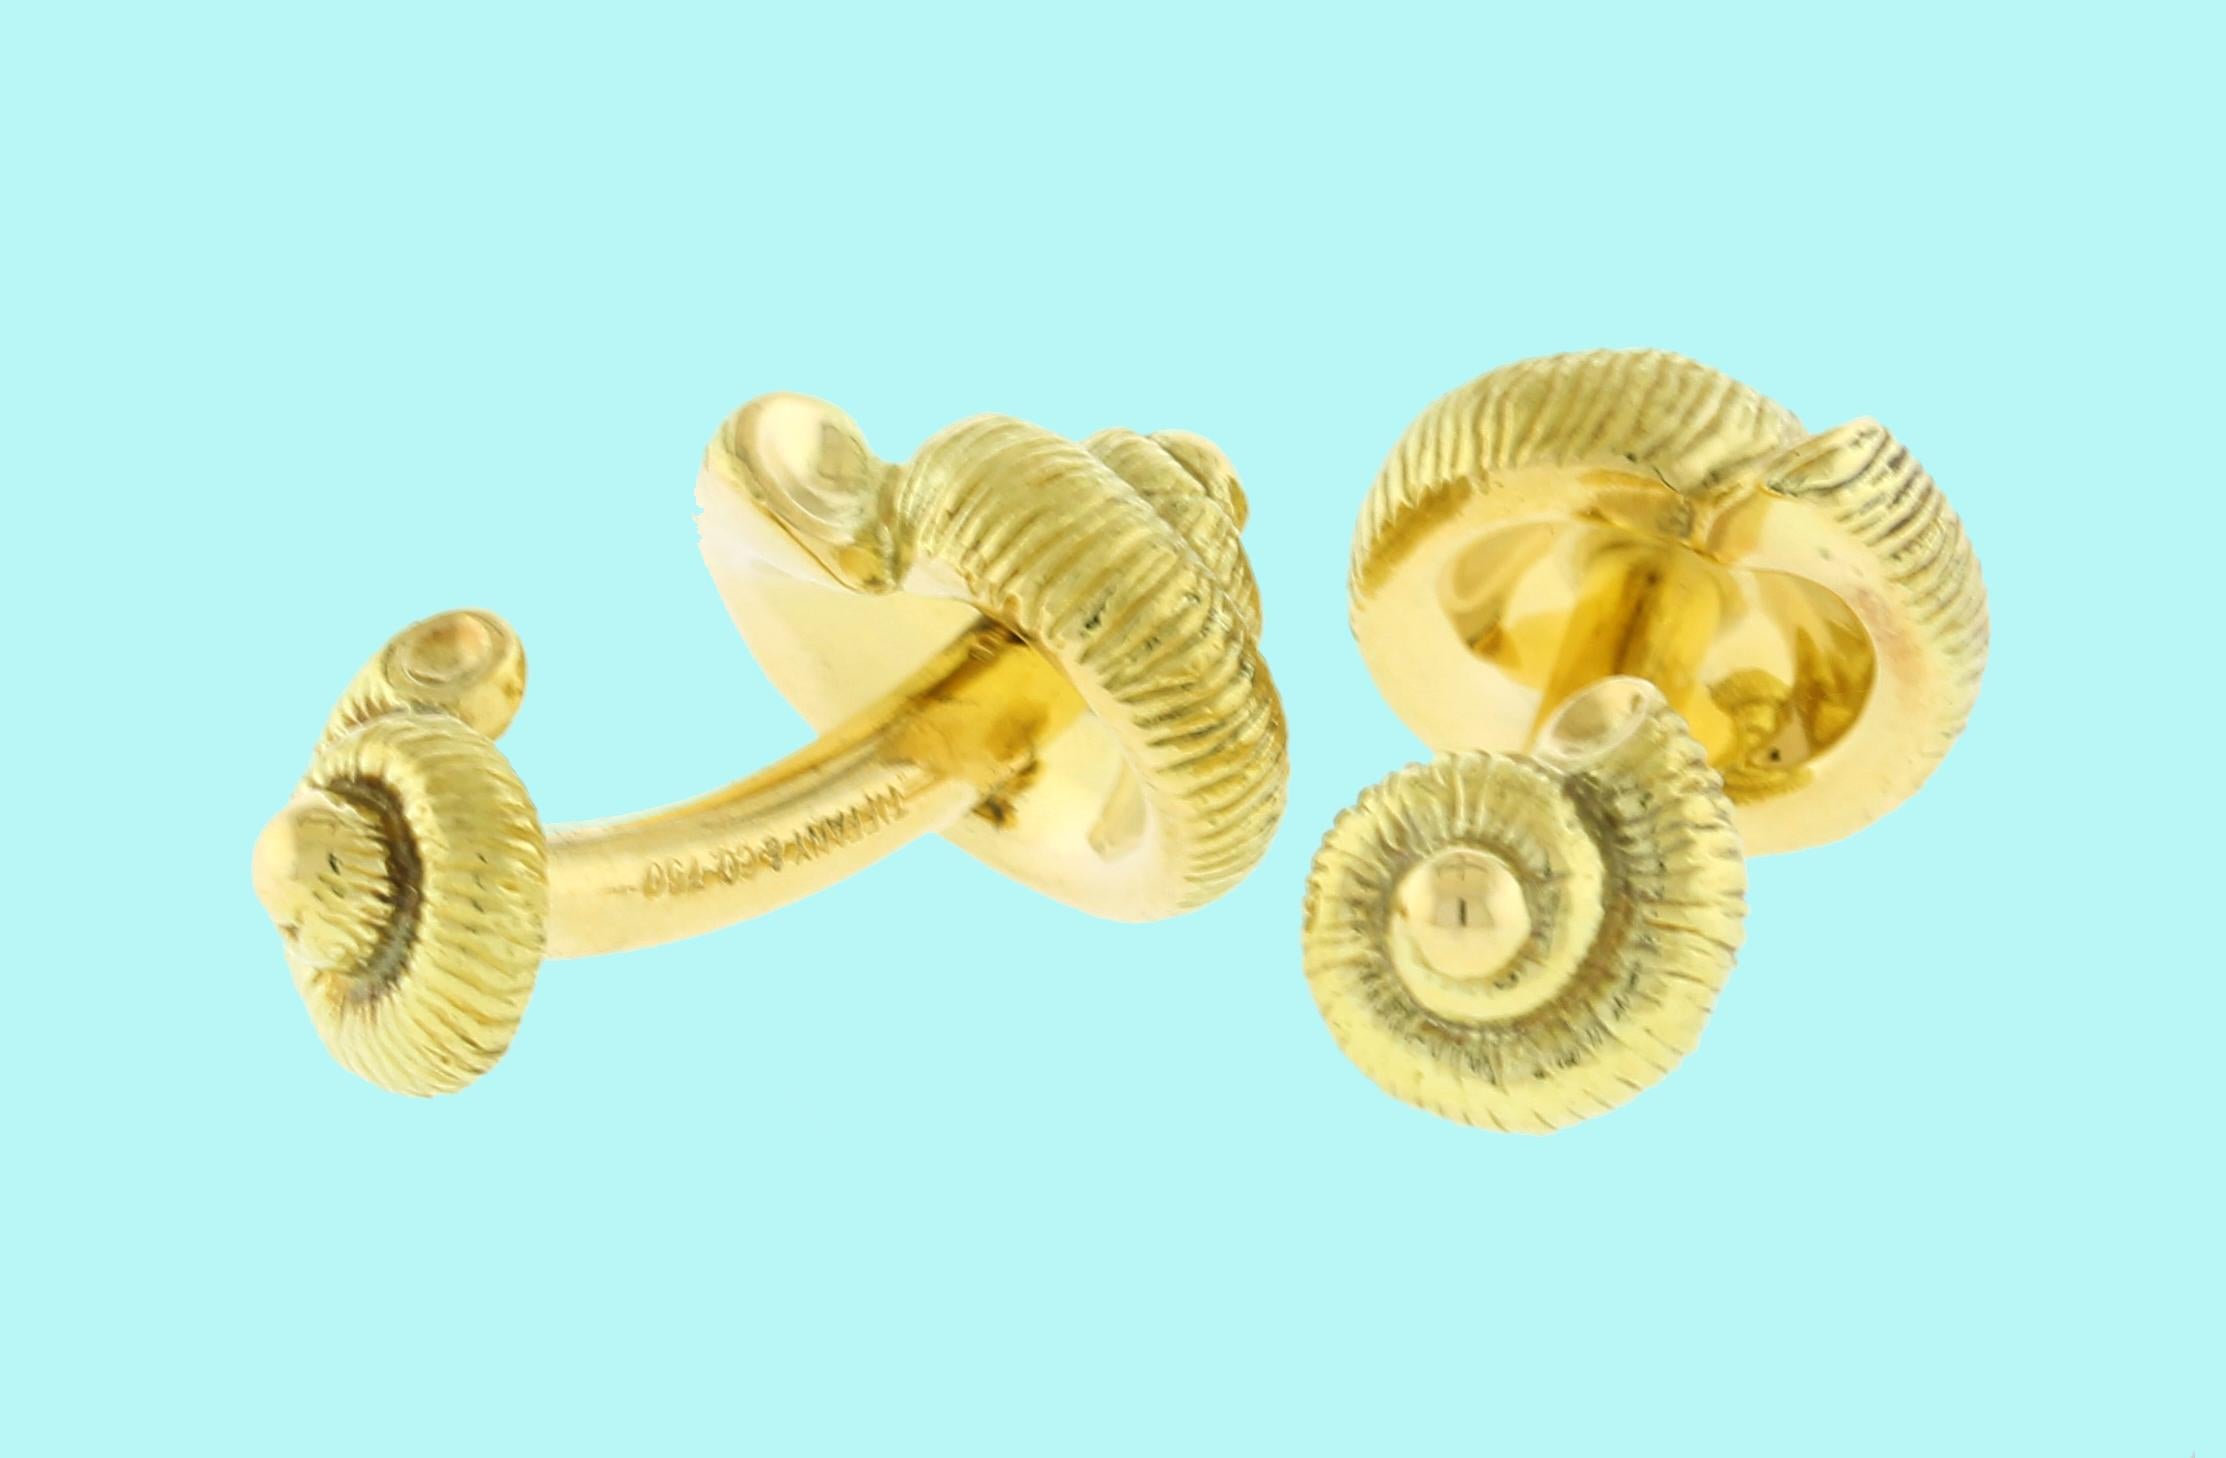 Tiffany & Co. 18kt Gold Seashell Cufflinks In Excellent Condition For Sale In Bethesda, MD